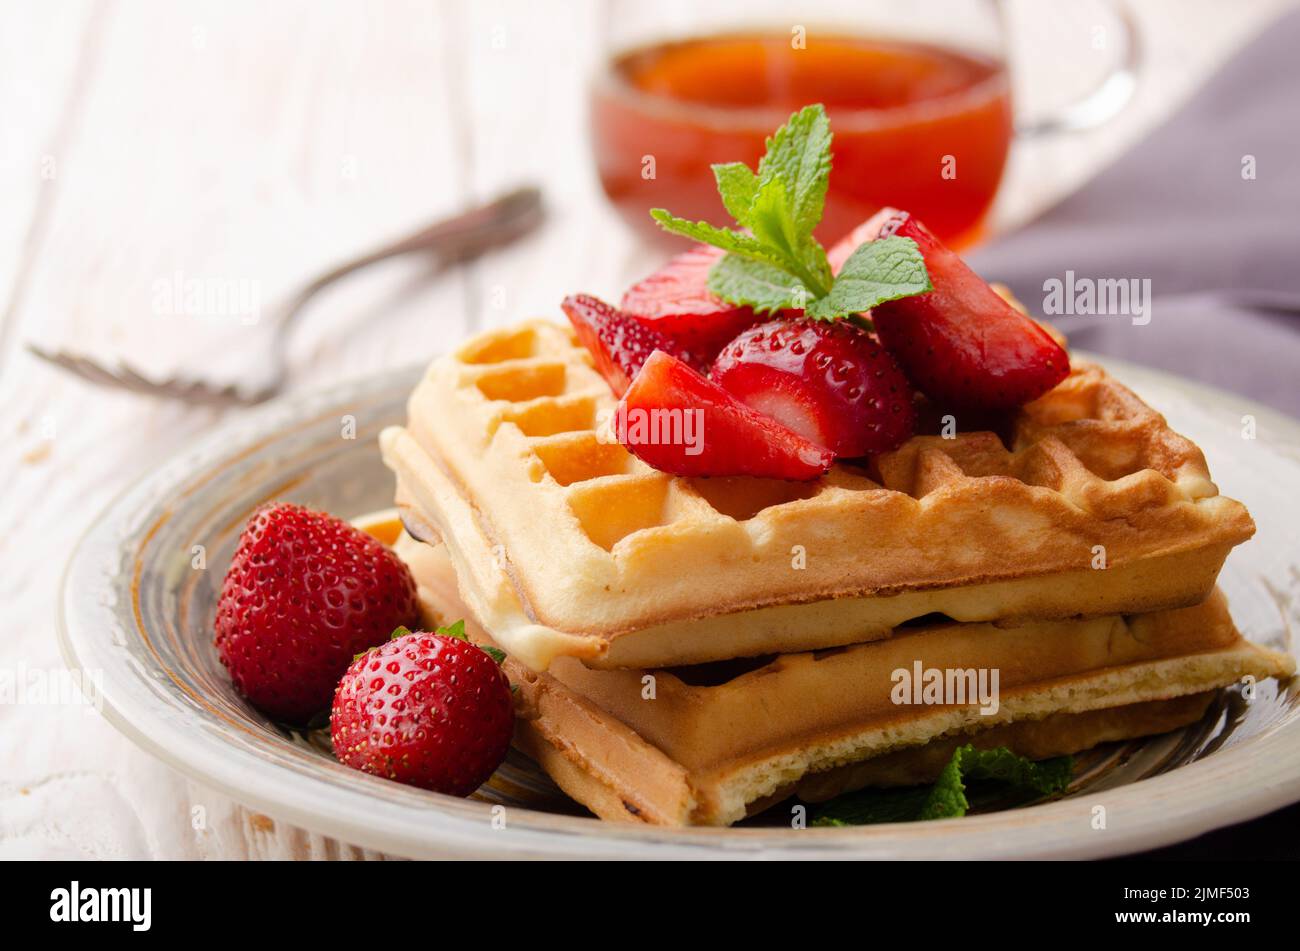 Closeup view at belgian waffles served with strawberries and mint leaf on white wooden kitchen table with syrup aside Stock Photo